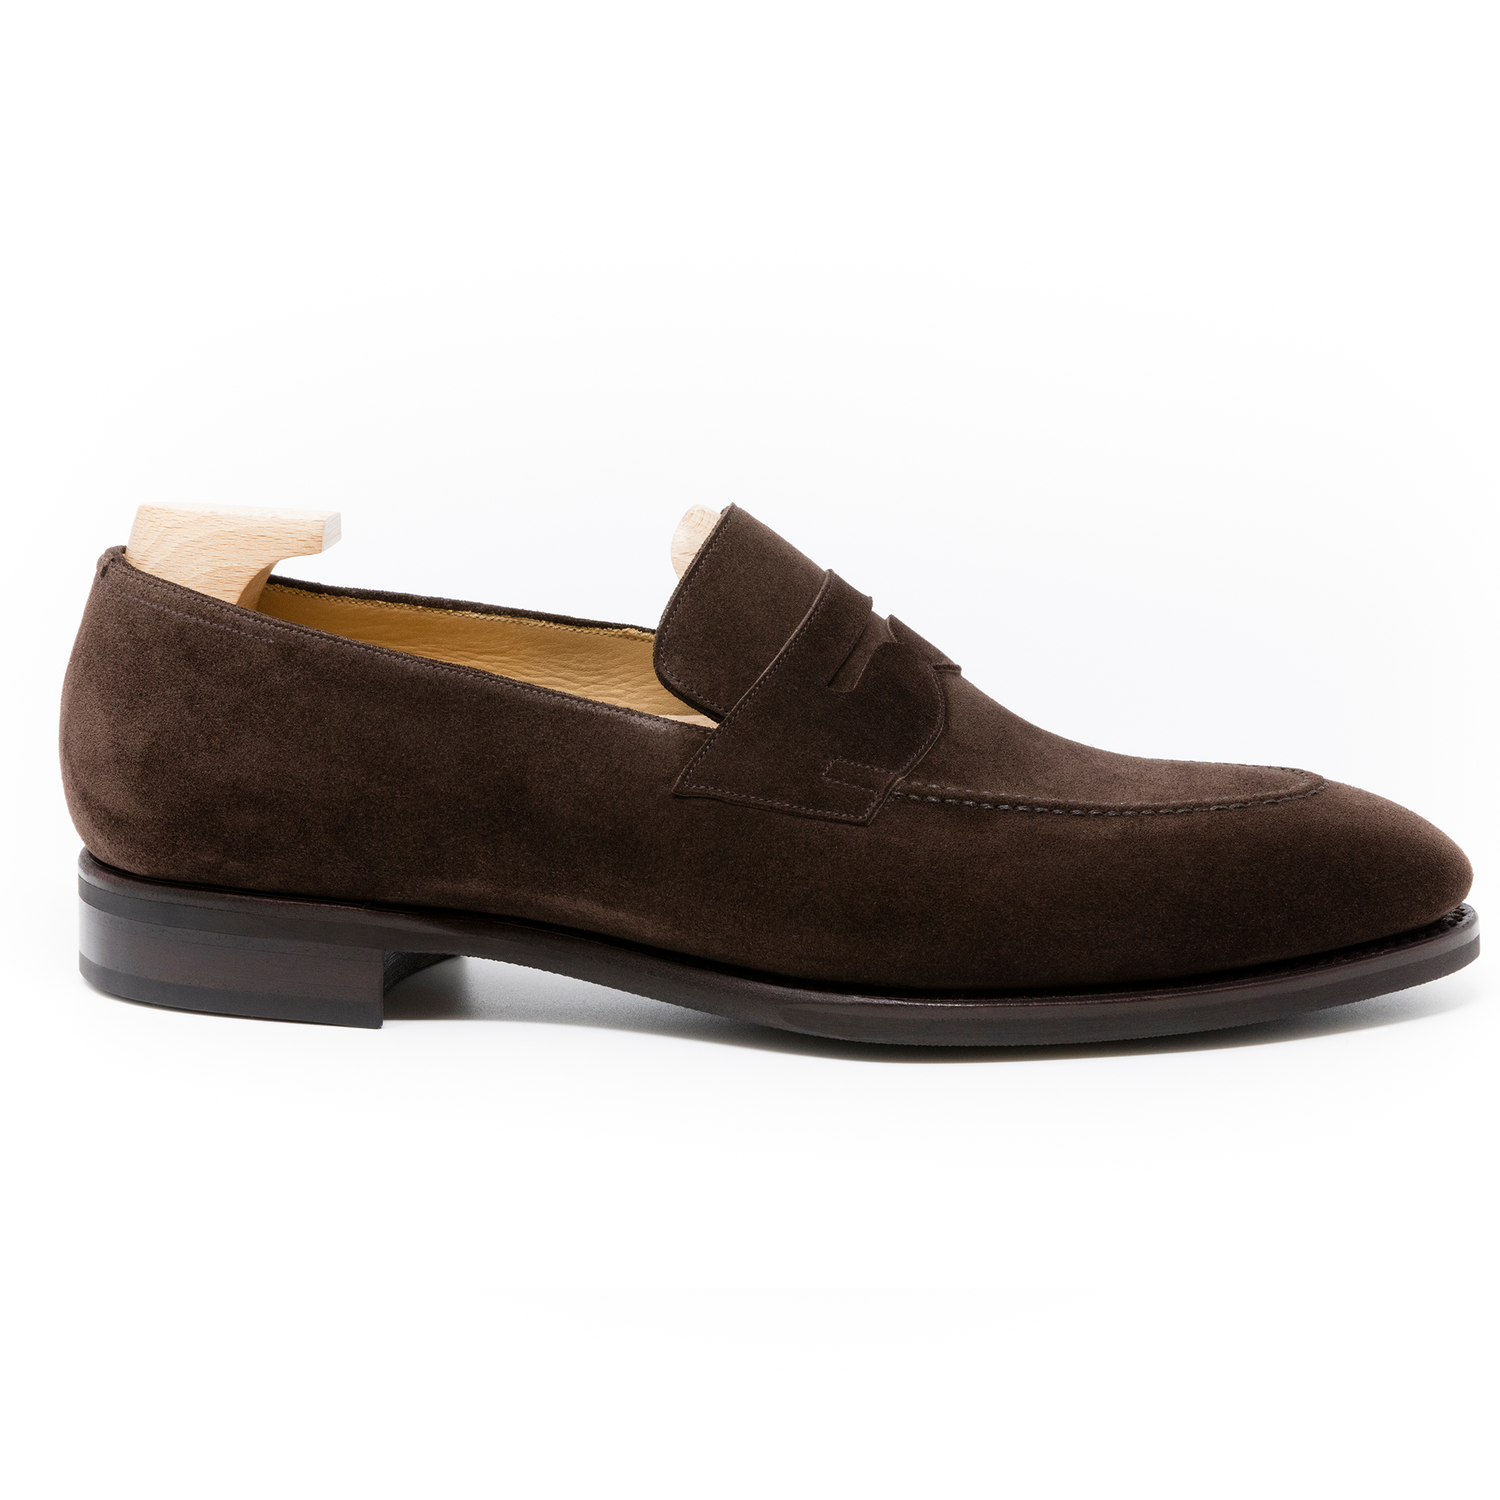 TLB Mallorca leather shoes 117 / GOYA / SUEDE BROWN